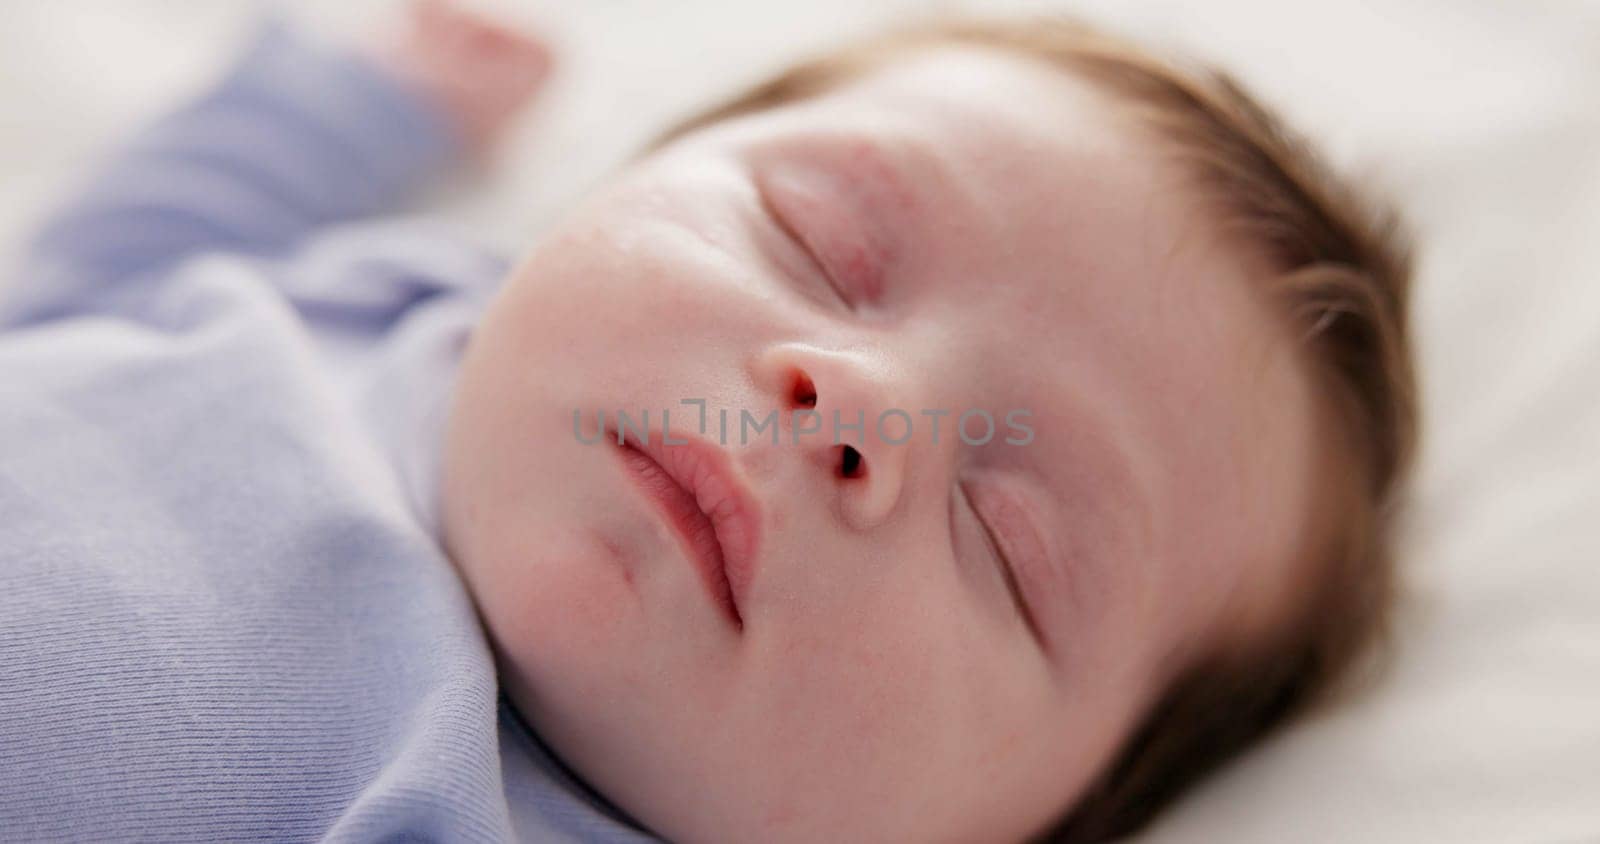 Face, growth and sleep with a baby on a bed closeup in a home, dreaming during a nap for child development. Relax, calm and rest with an adorable newborn infant asleep in a bedroom for comfort.